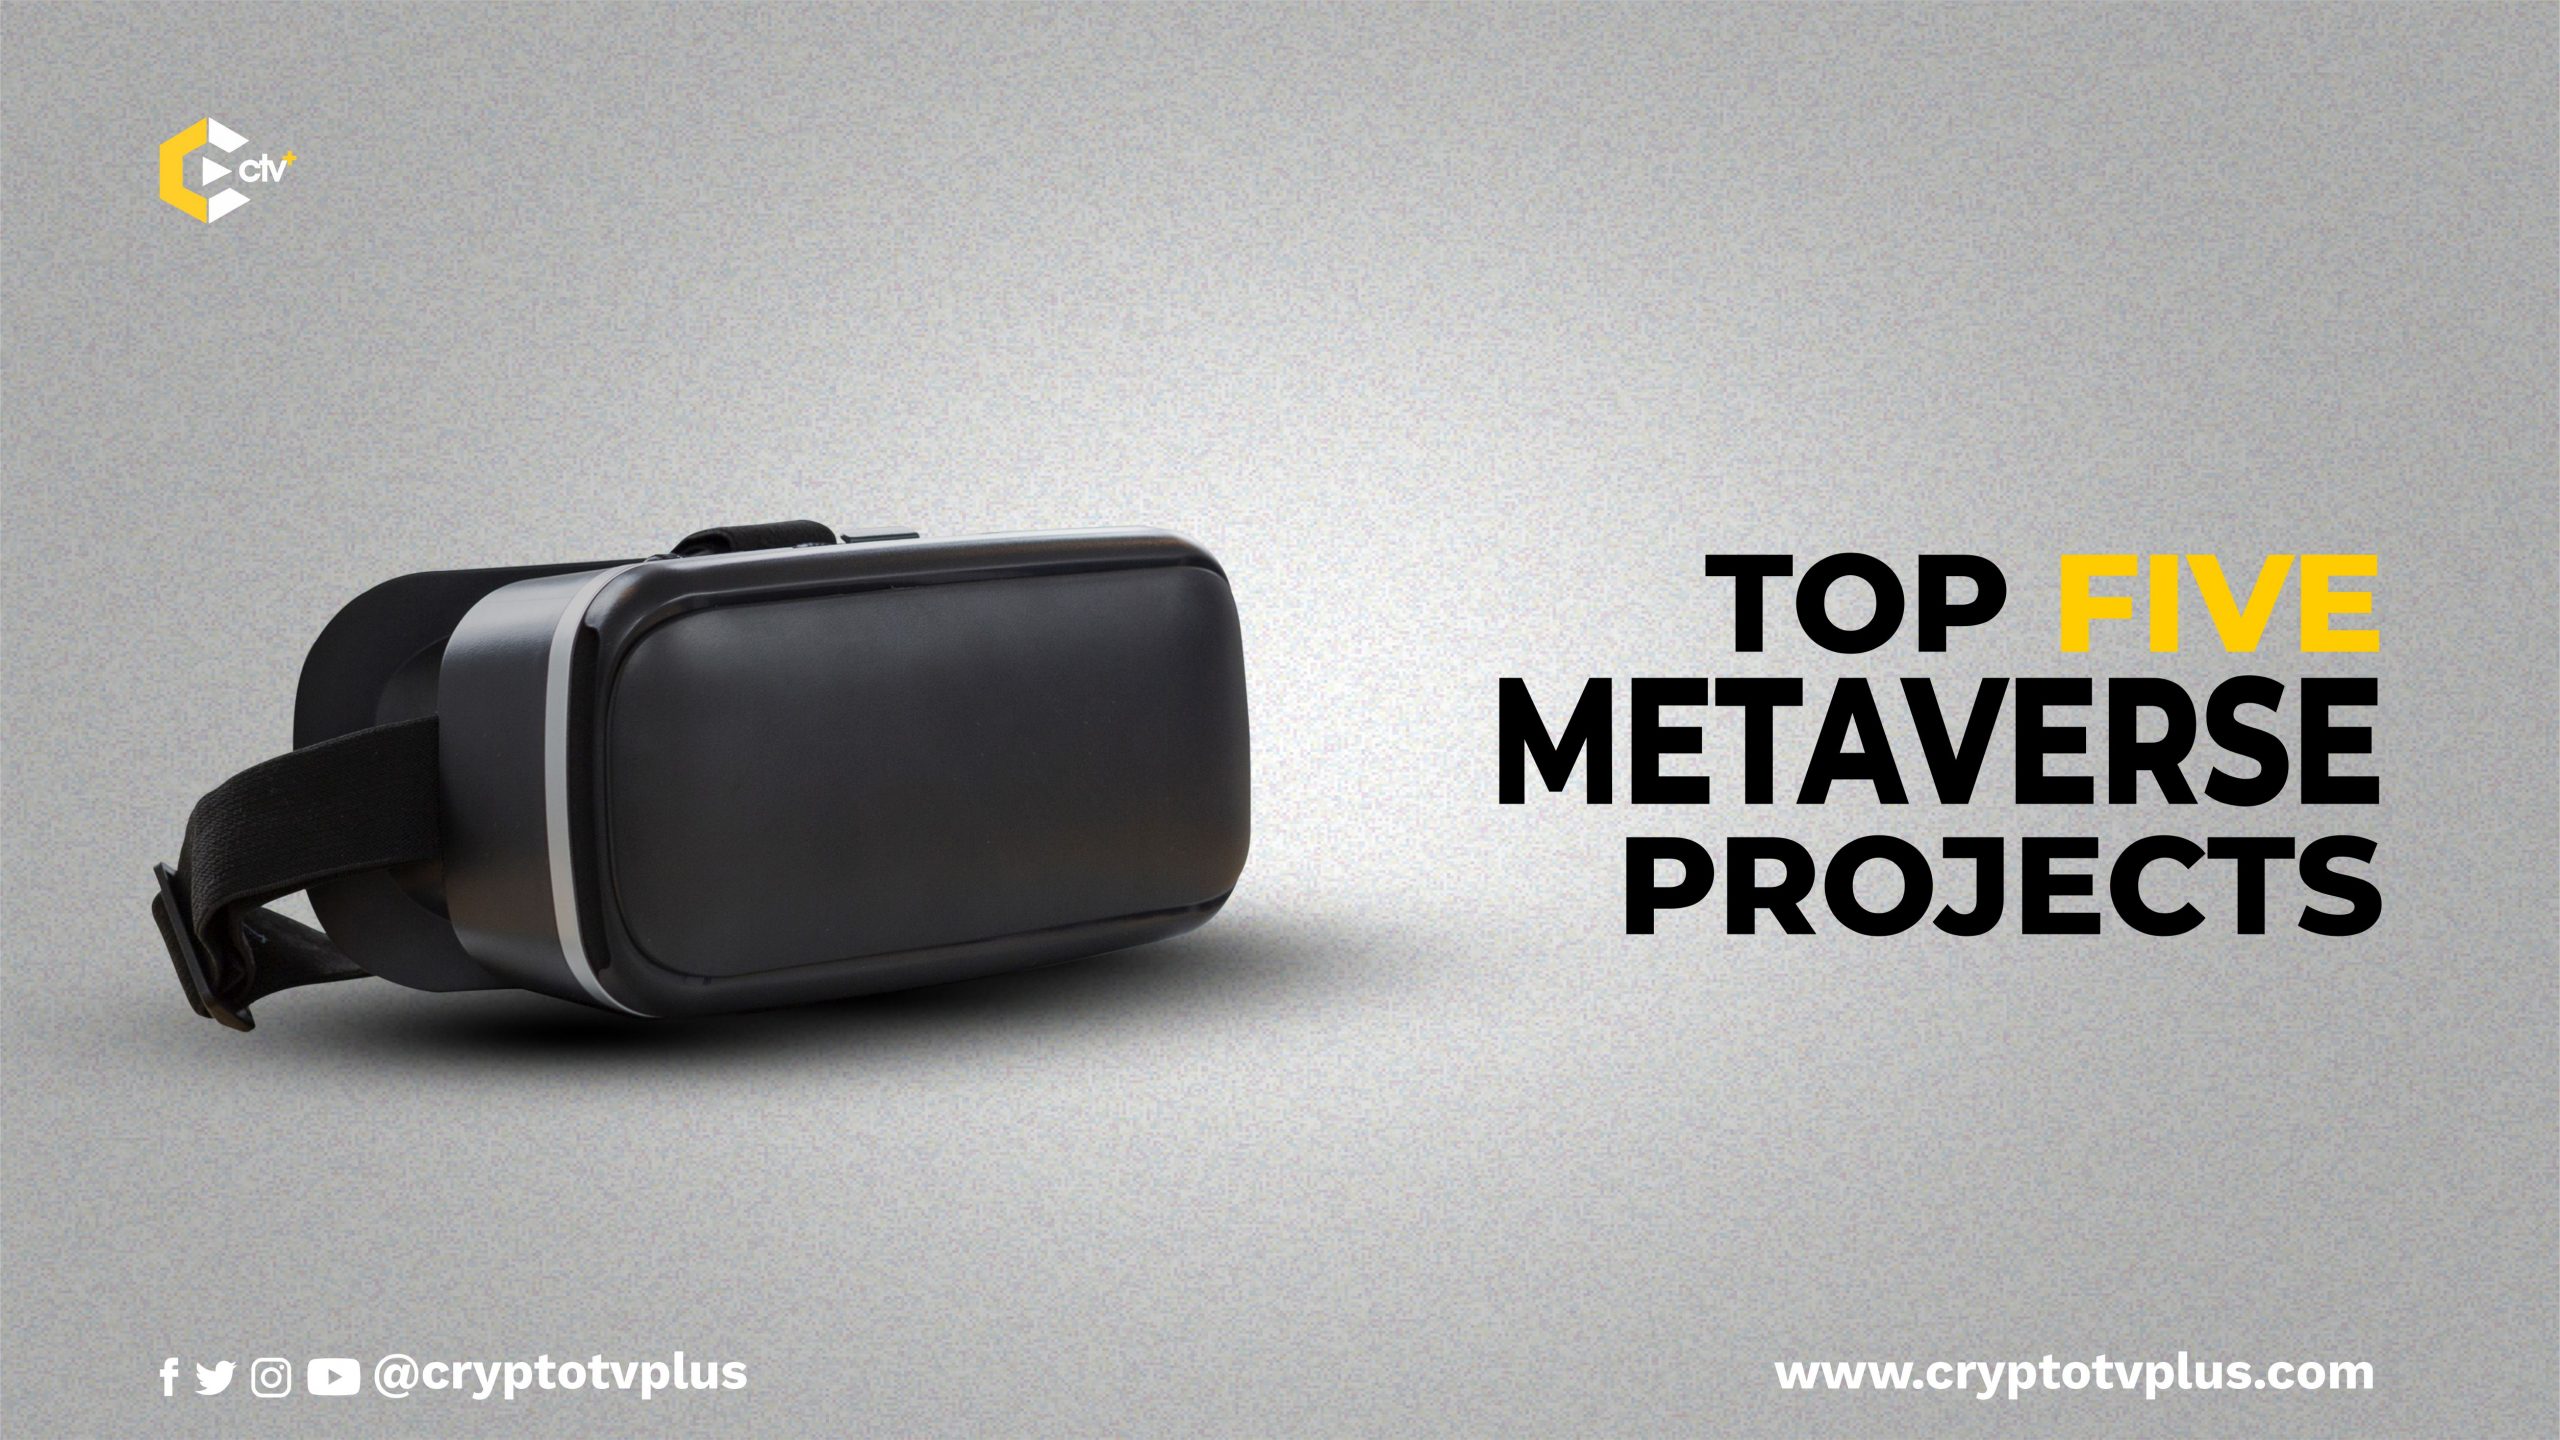 Top 5 metaverse projects